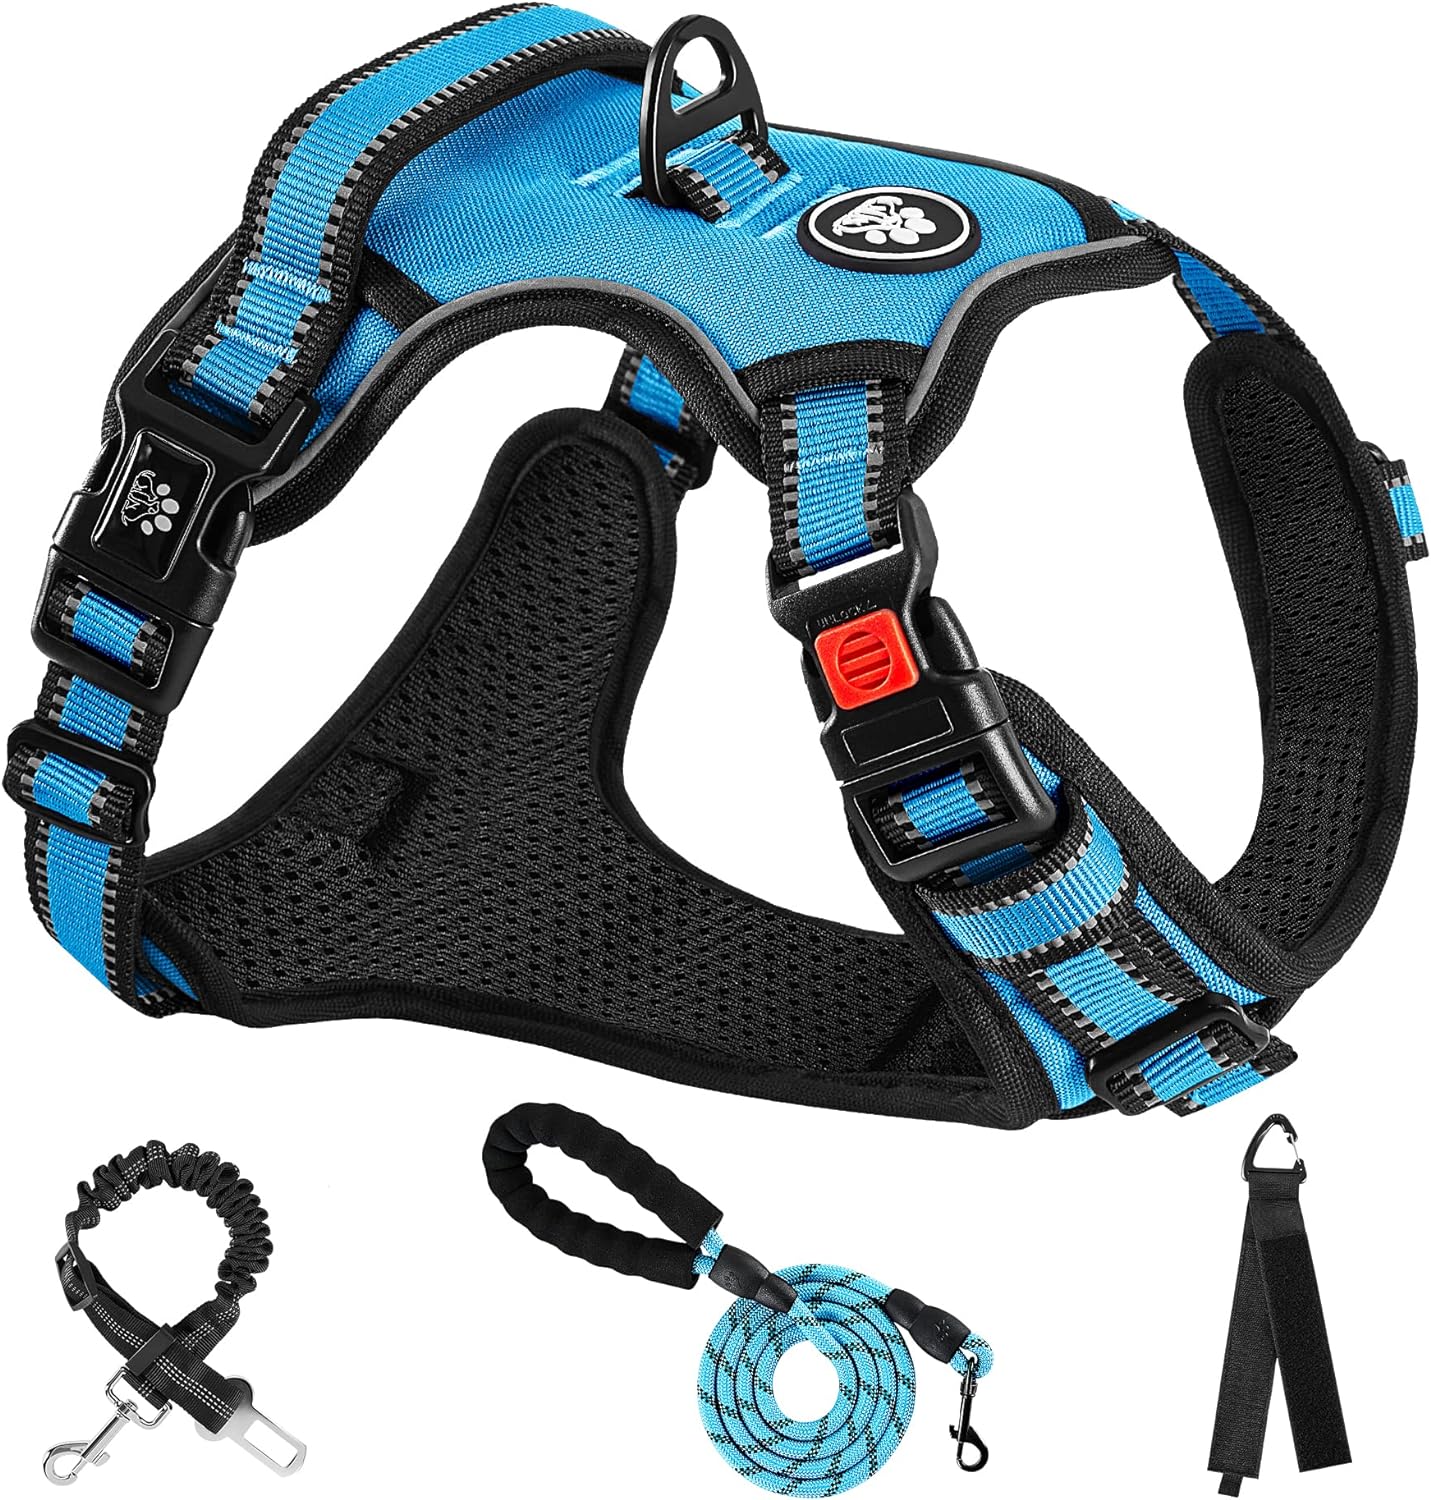 NESTROAD No Pull Dog Harness,Adjustable Oxford Dog Vest Harness with Leash,Reflective No-Choke Pet Harness with Easy Control Soft Handle for Large Dogs(Large,Blue)